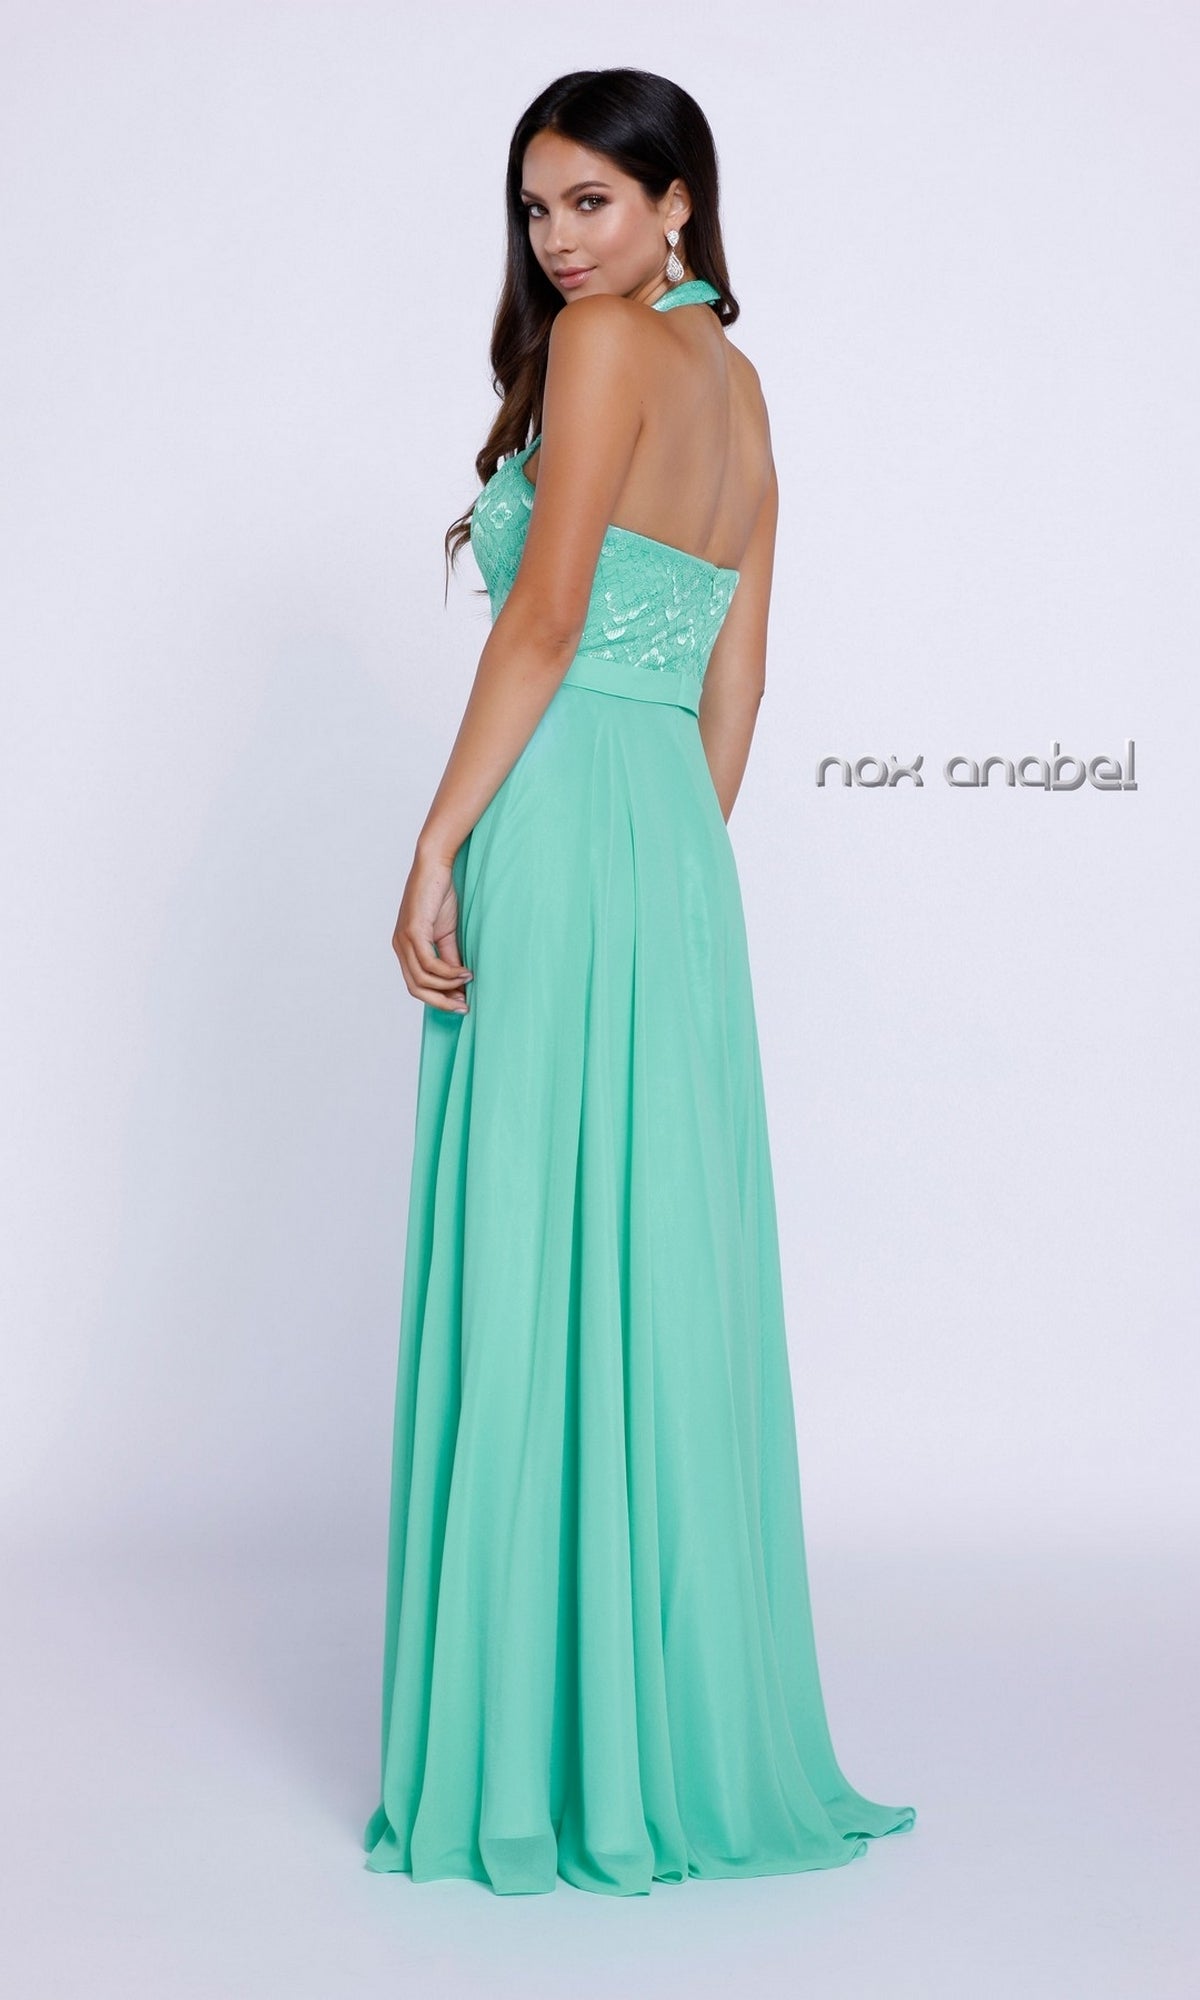  Long Formal Evening Gown With Lace Halter Top